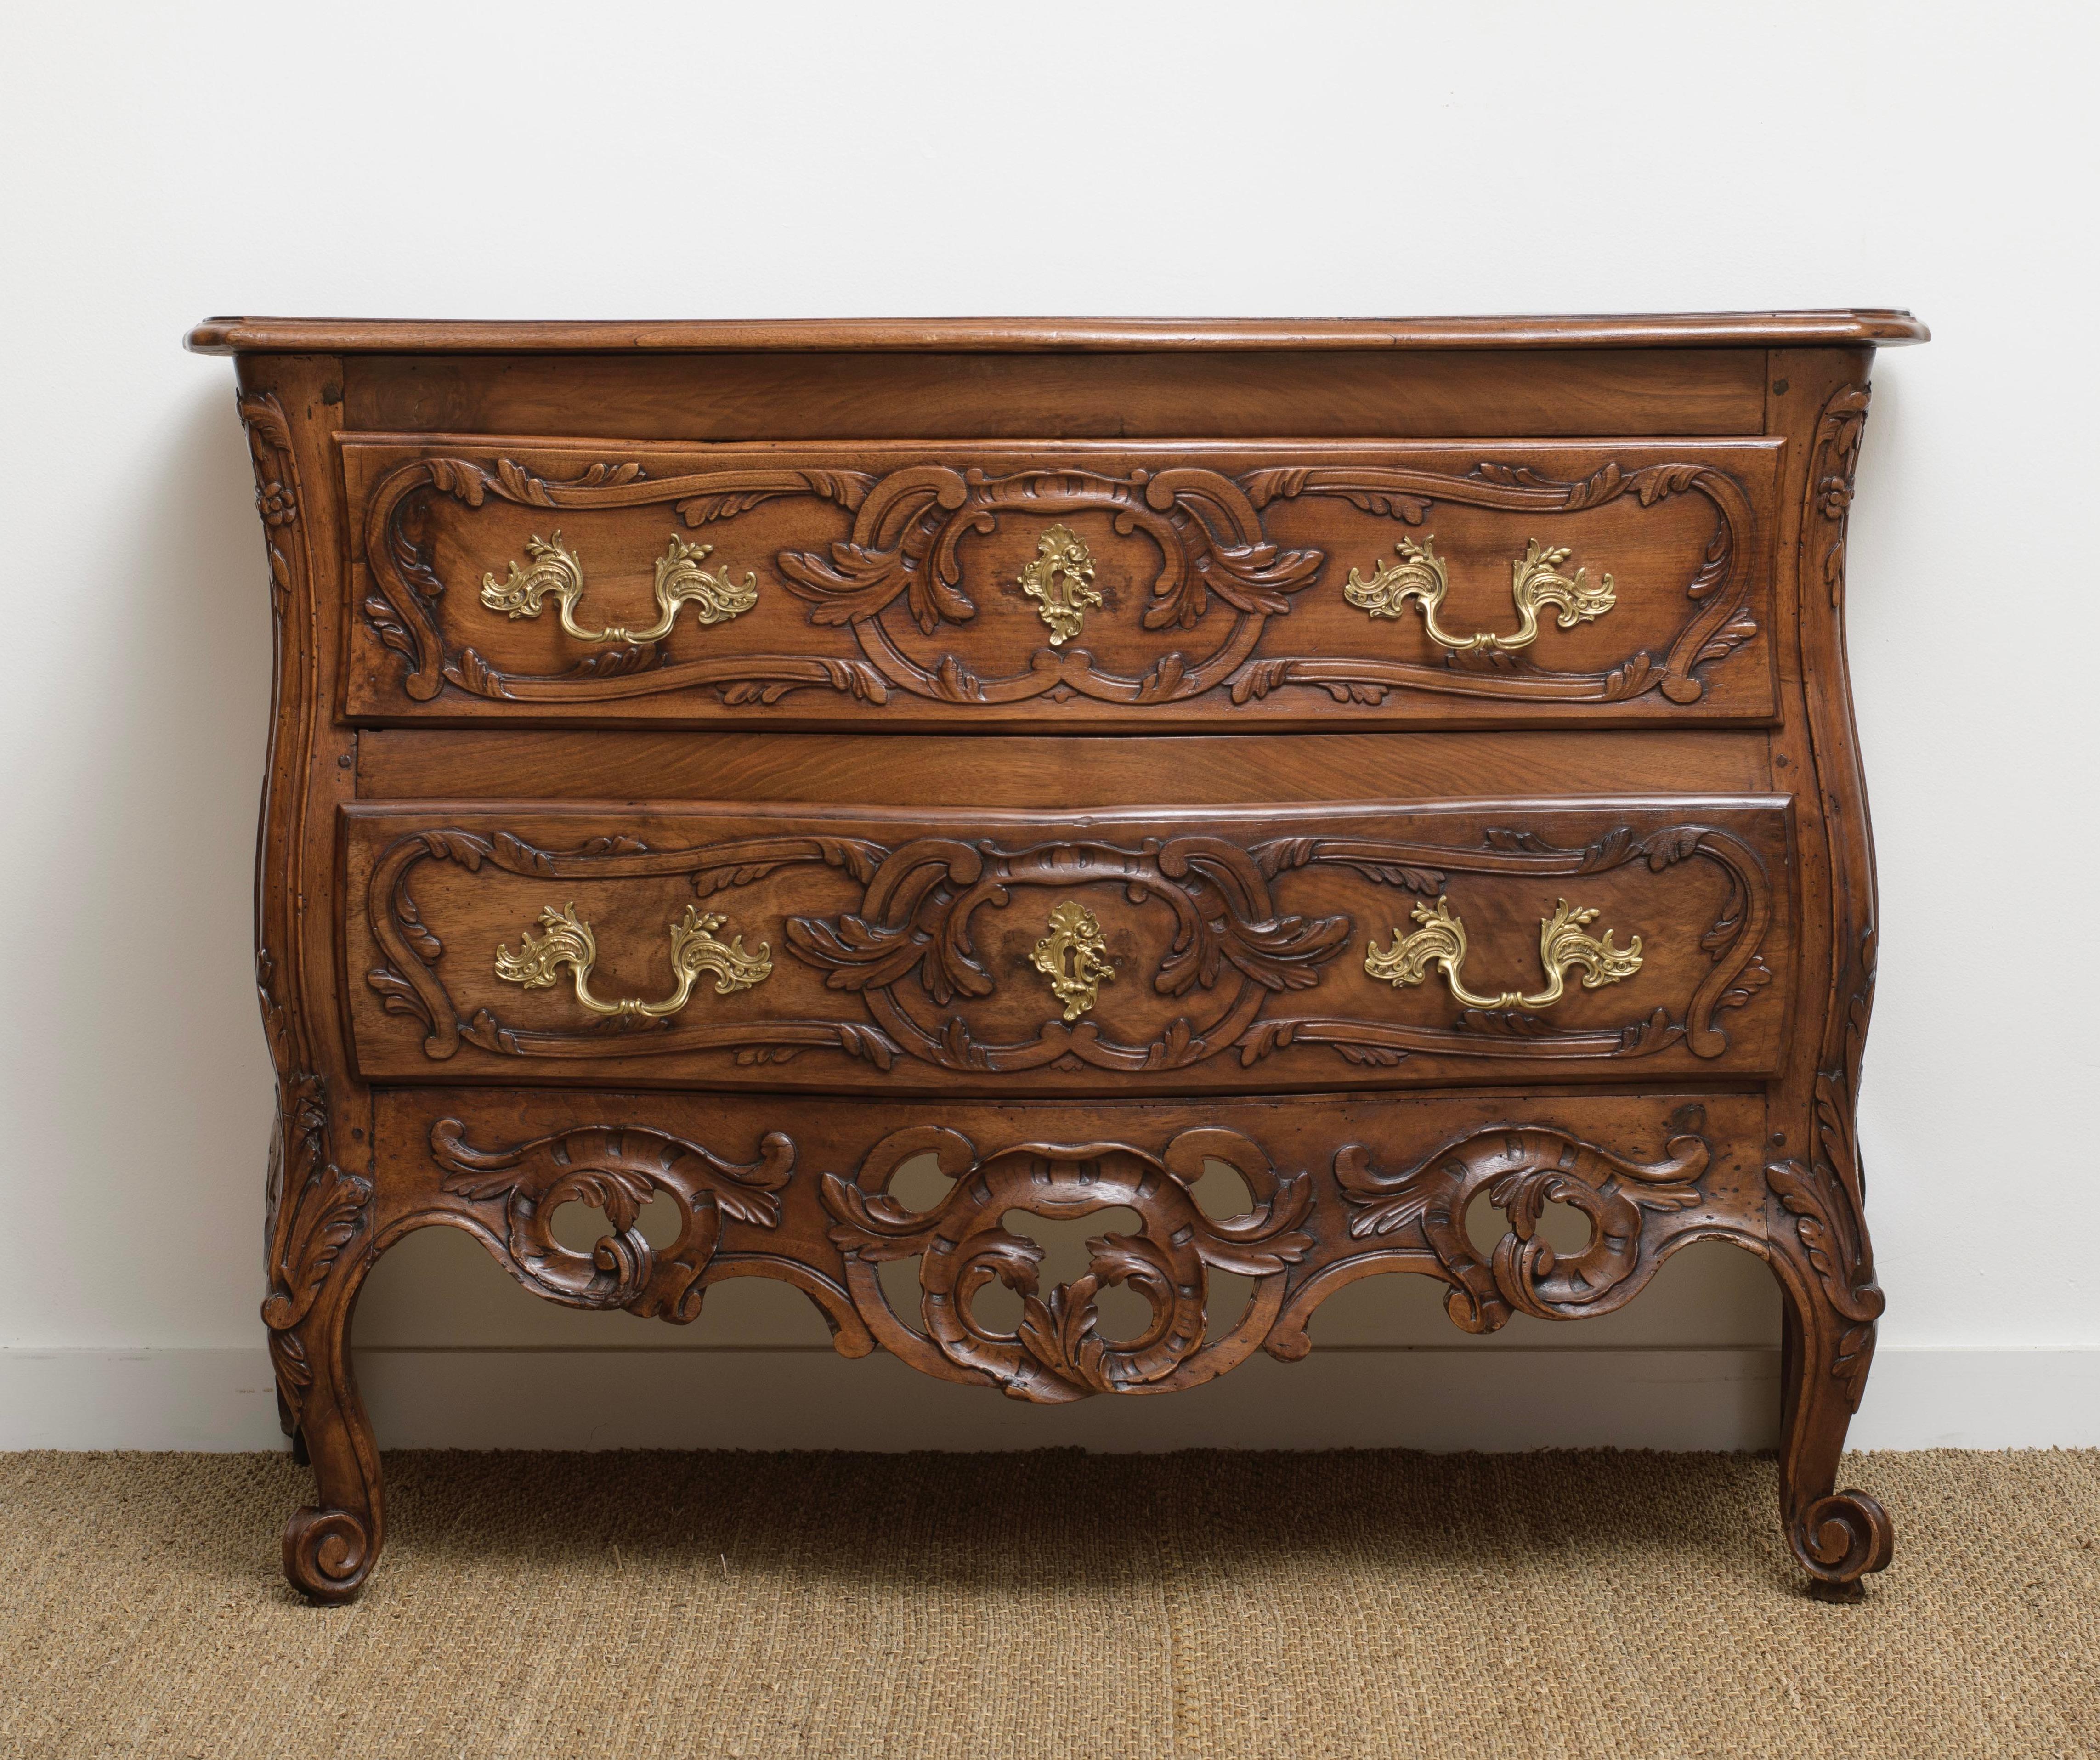 From Nîmes this opulently adorned two-drawer galbe front and openwork crosspiece commode crafted from walnut from Nimes, France, dating back to around 1730.  Commode Sauteuses from Nimes are distinguished by their elongated legs and two drawers.  